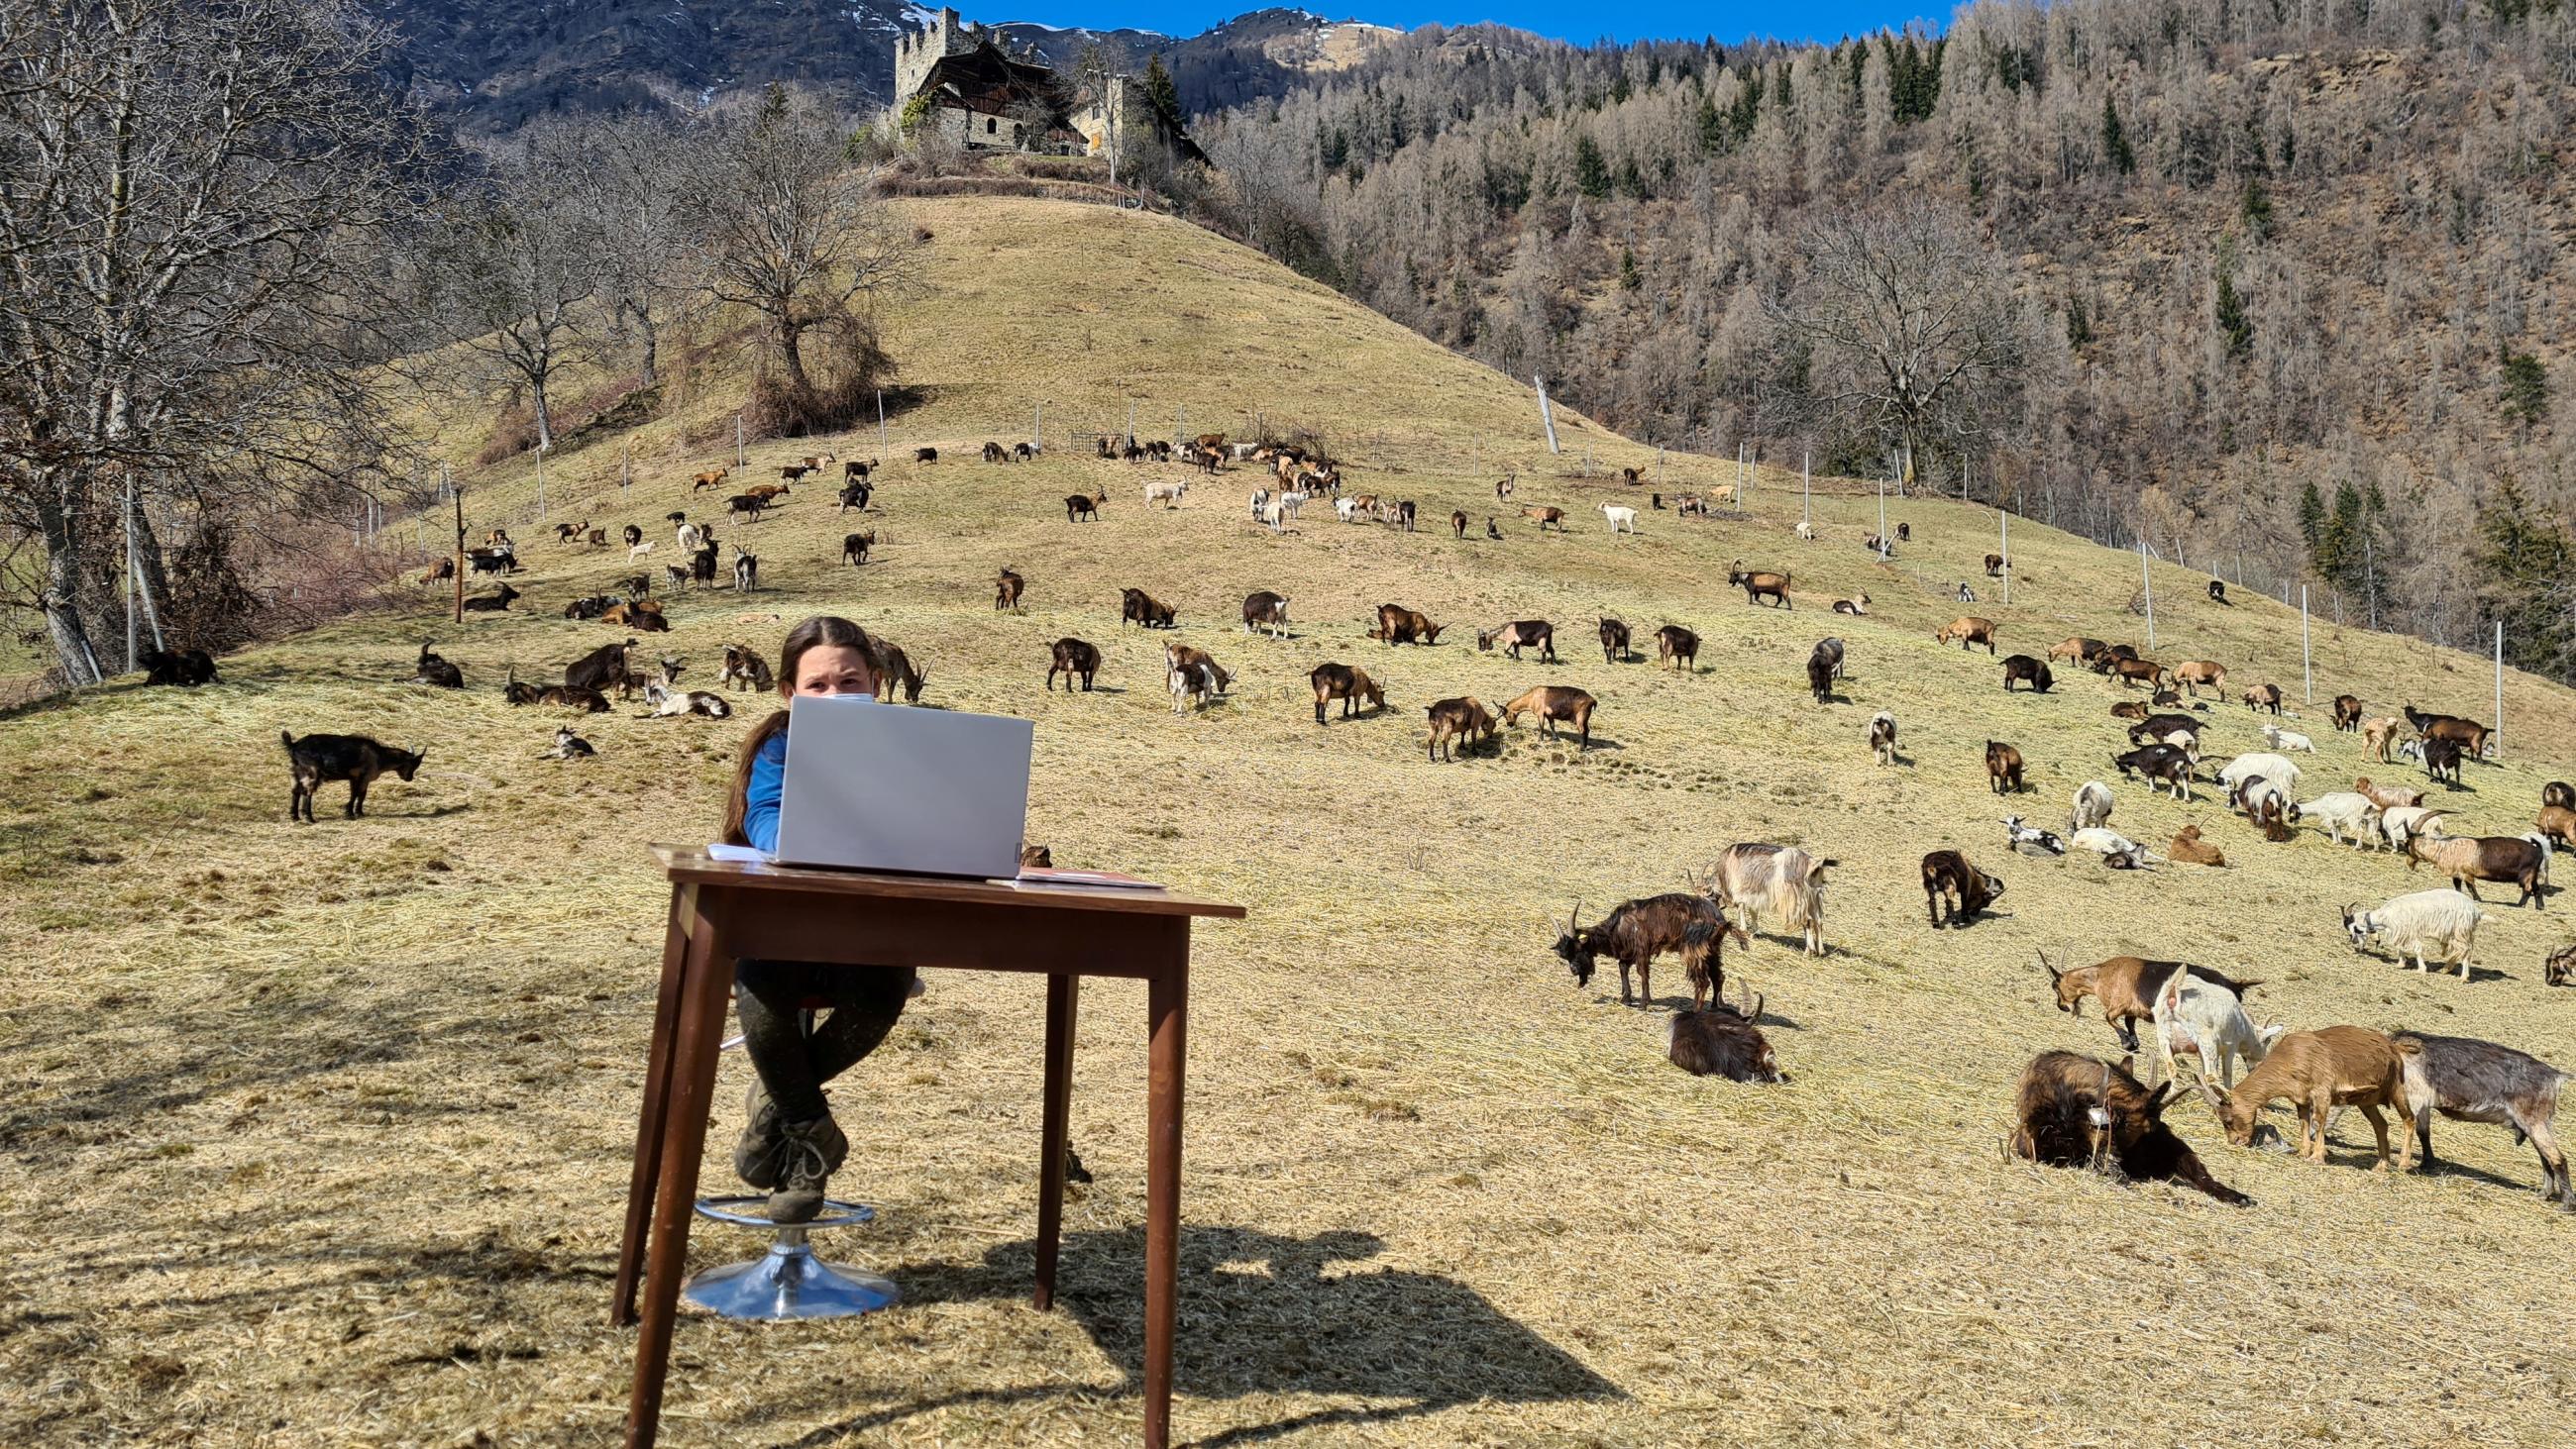 A young girl attends her online lessons surrounded by her shepherd father's herd of goats in the mountains, while schools are closed due to COVID-19 restrictions, in Caldes, Italy, on March 20, 2021.